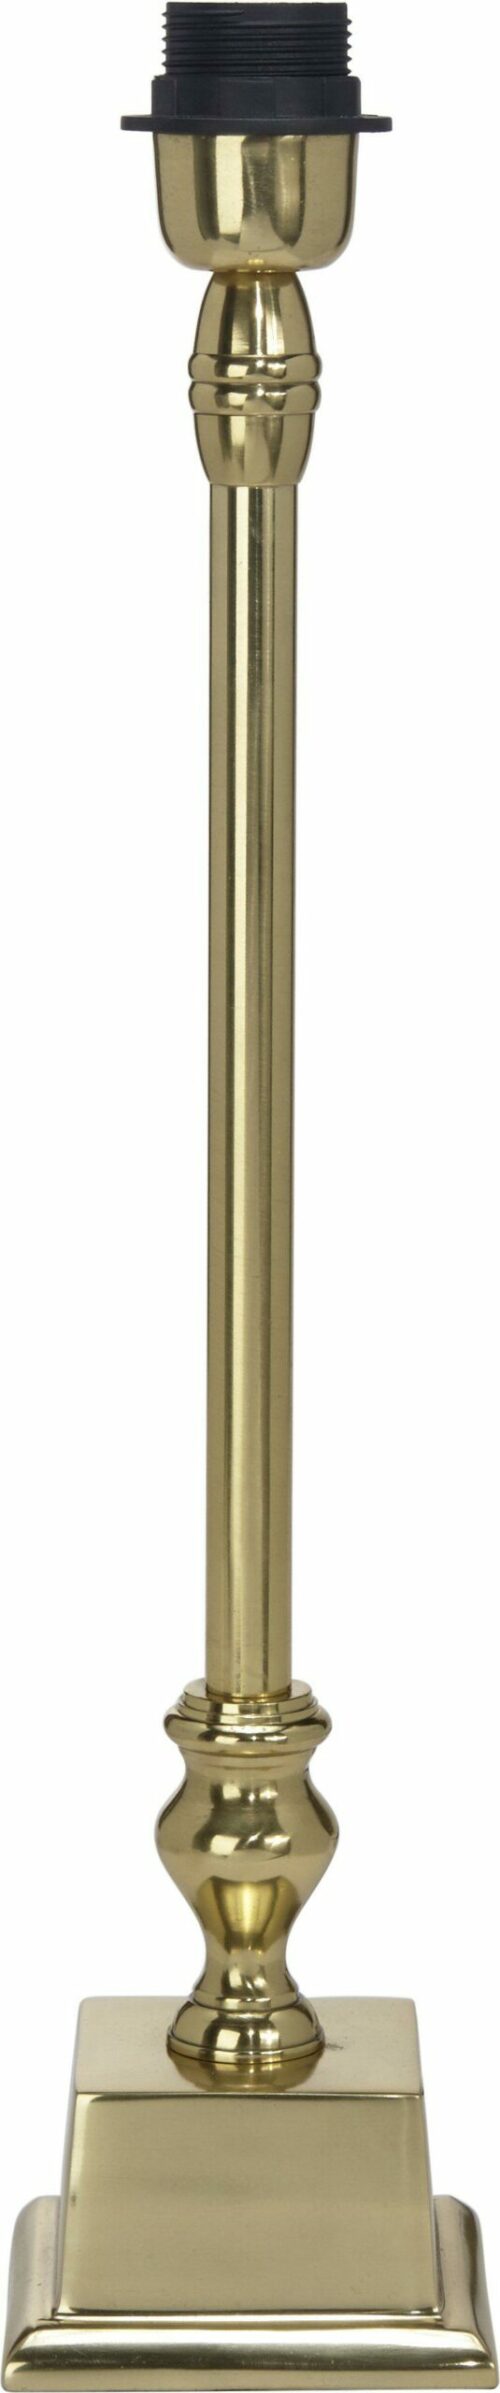 Lampenfuss Linne Gold 65 cm scaled